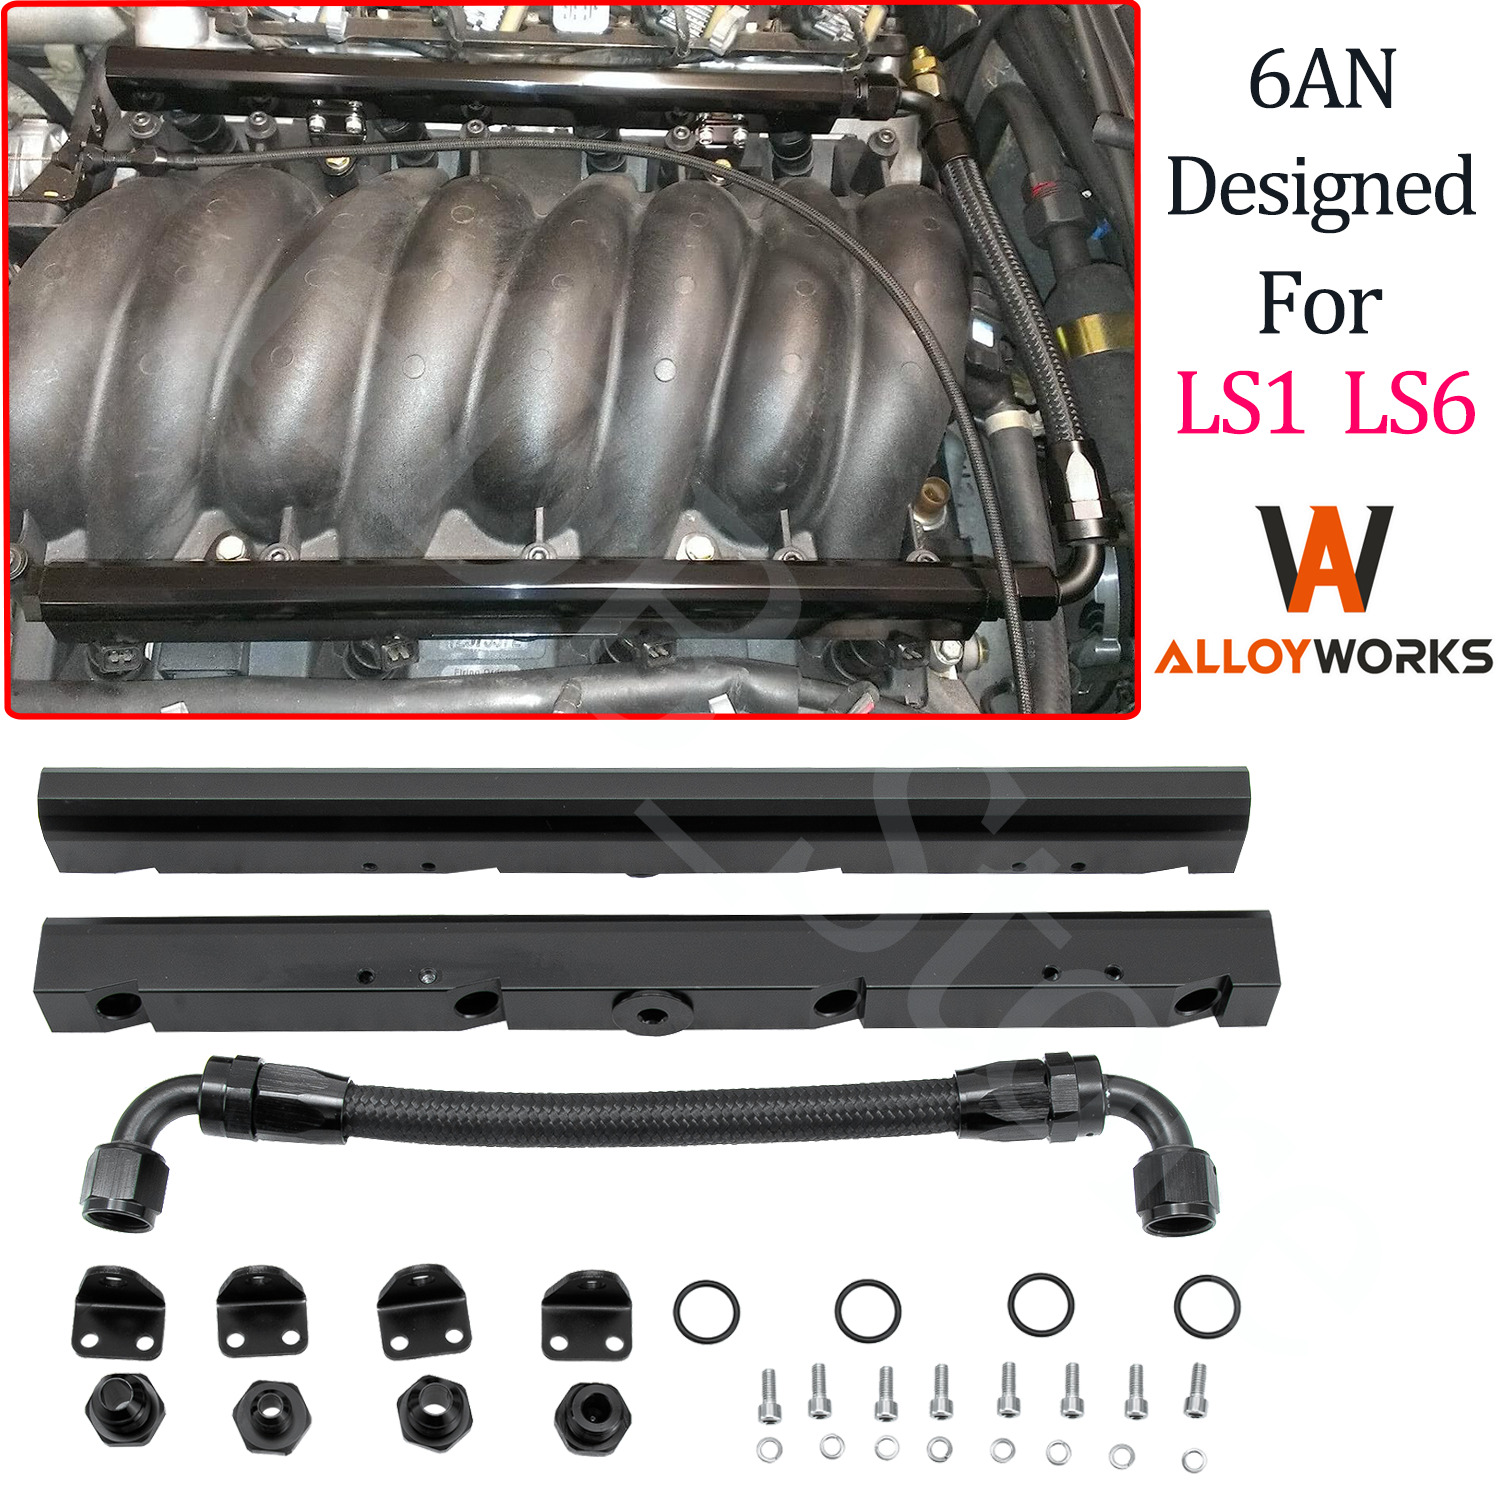 Black Fuel Rails w/ Fittings & Crossover Hose Kit for LS1/ LS6 -6AN High Flow